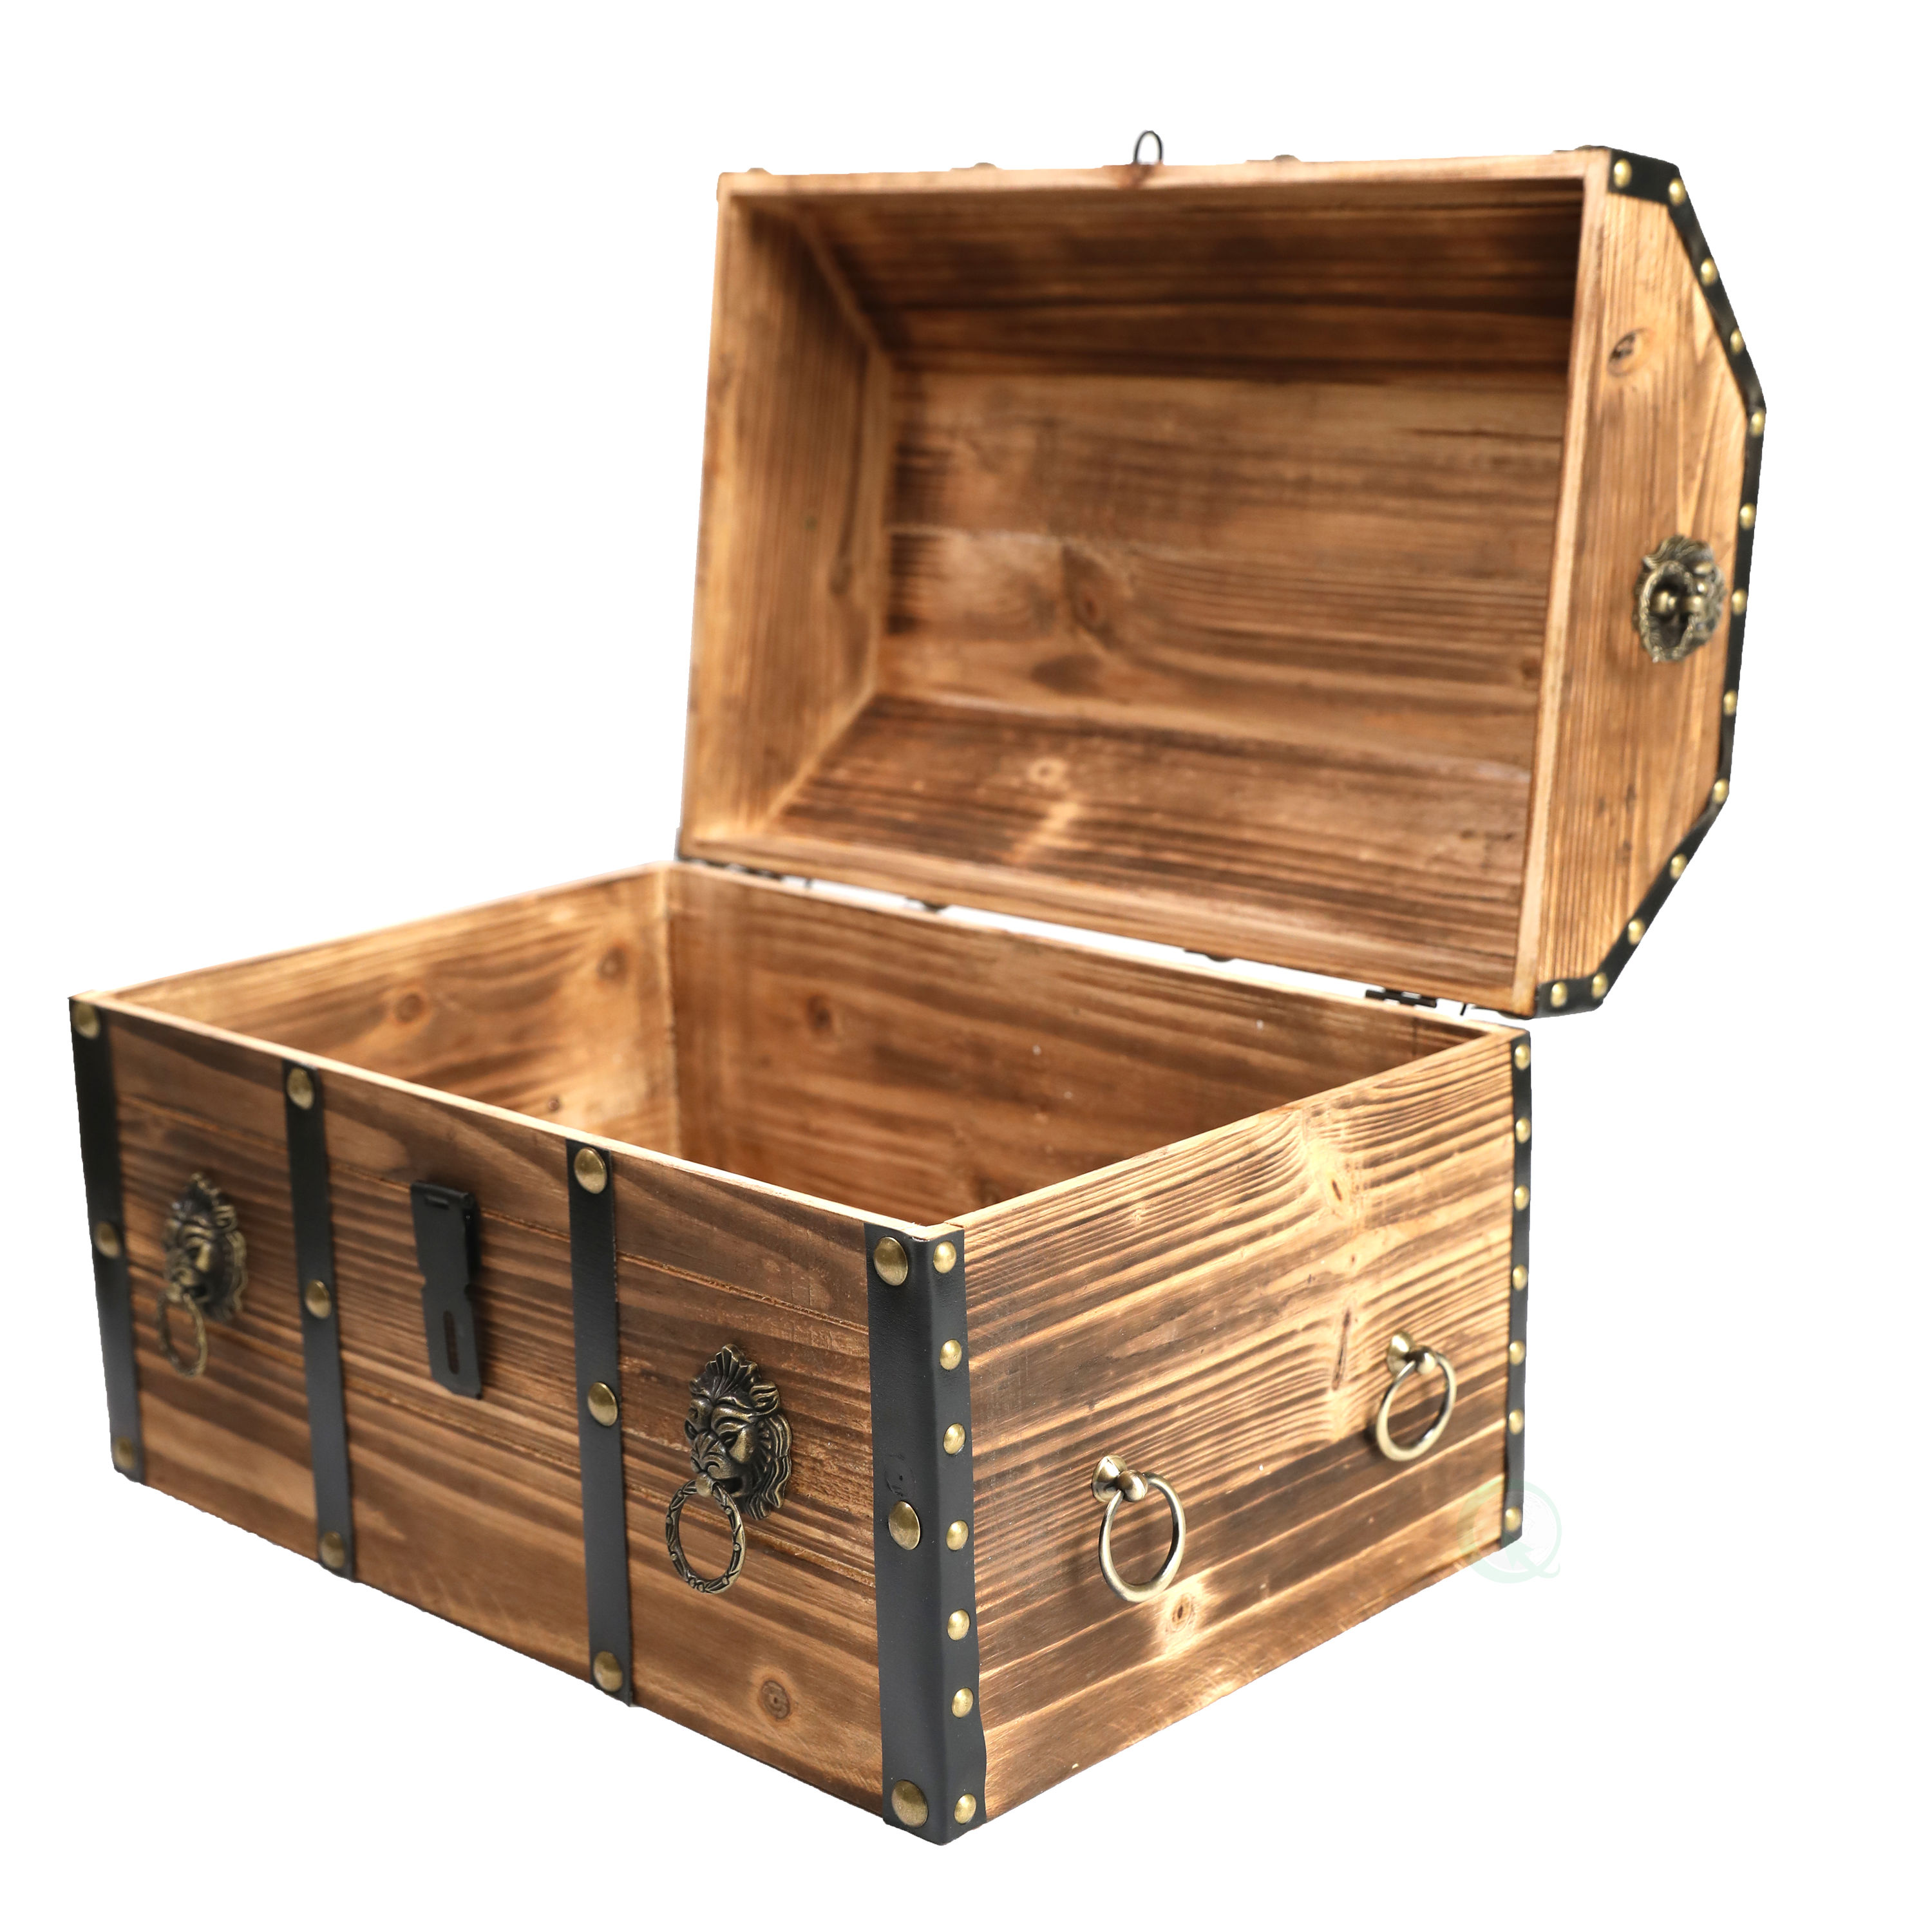 Details about   New Vintiquewise Large Wooden Pirate Lockable Trunk with Lion Rings QI003038L 